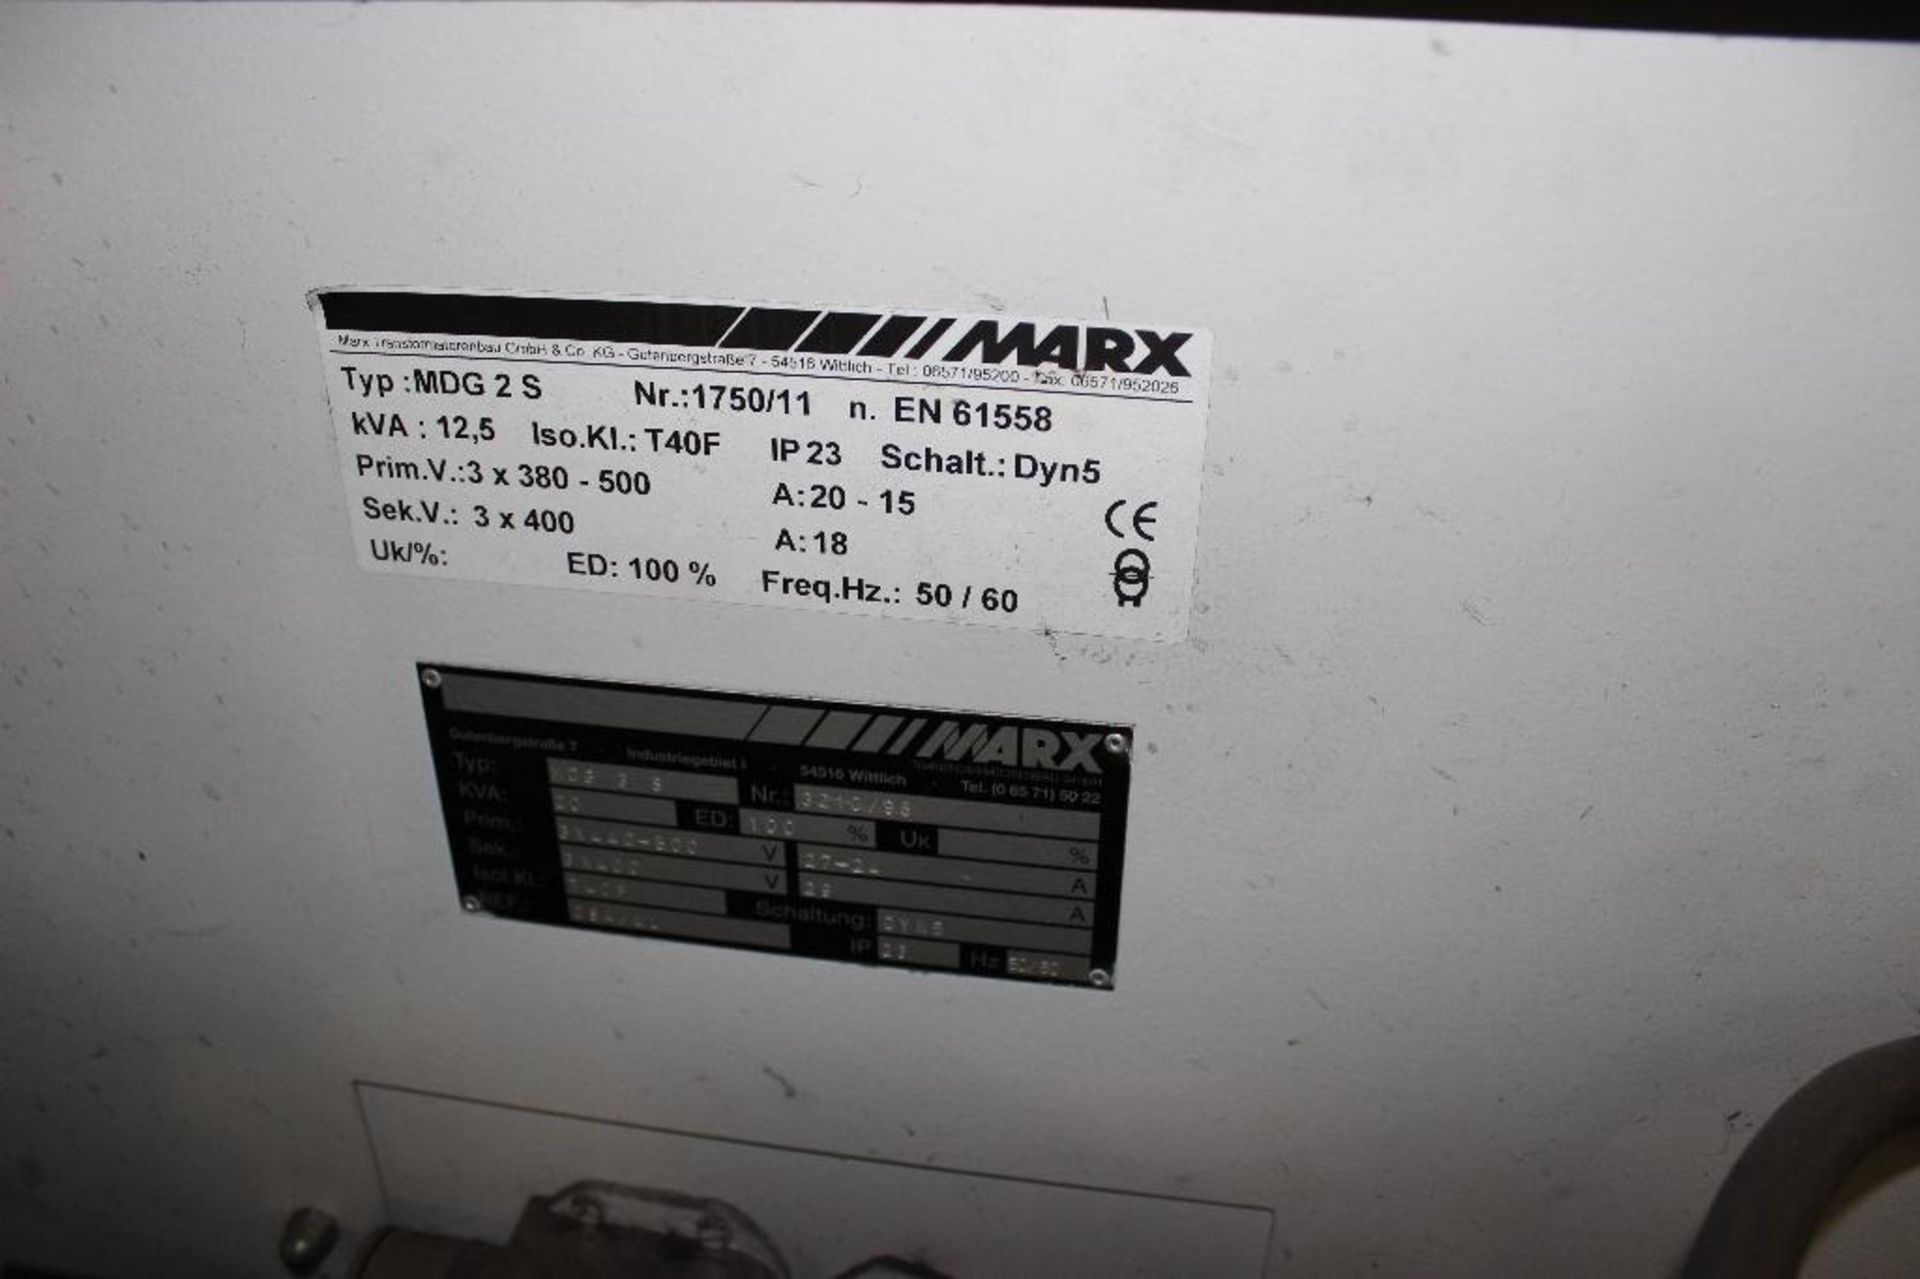 Marx transformer type MDG2S KVA 20 serial #3210/98 serial # 3210/98, Located at 1375 Peterson Indust - Image 2 of 2